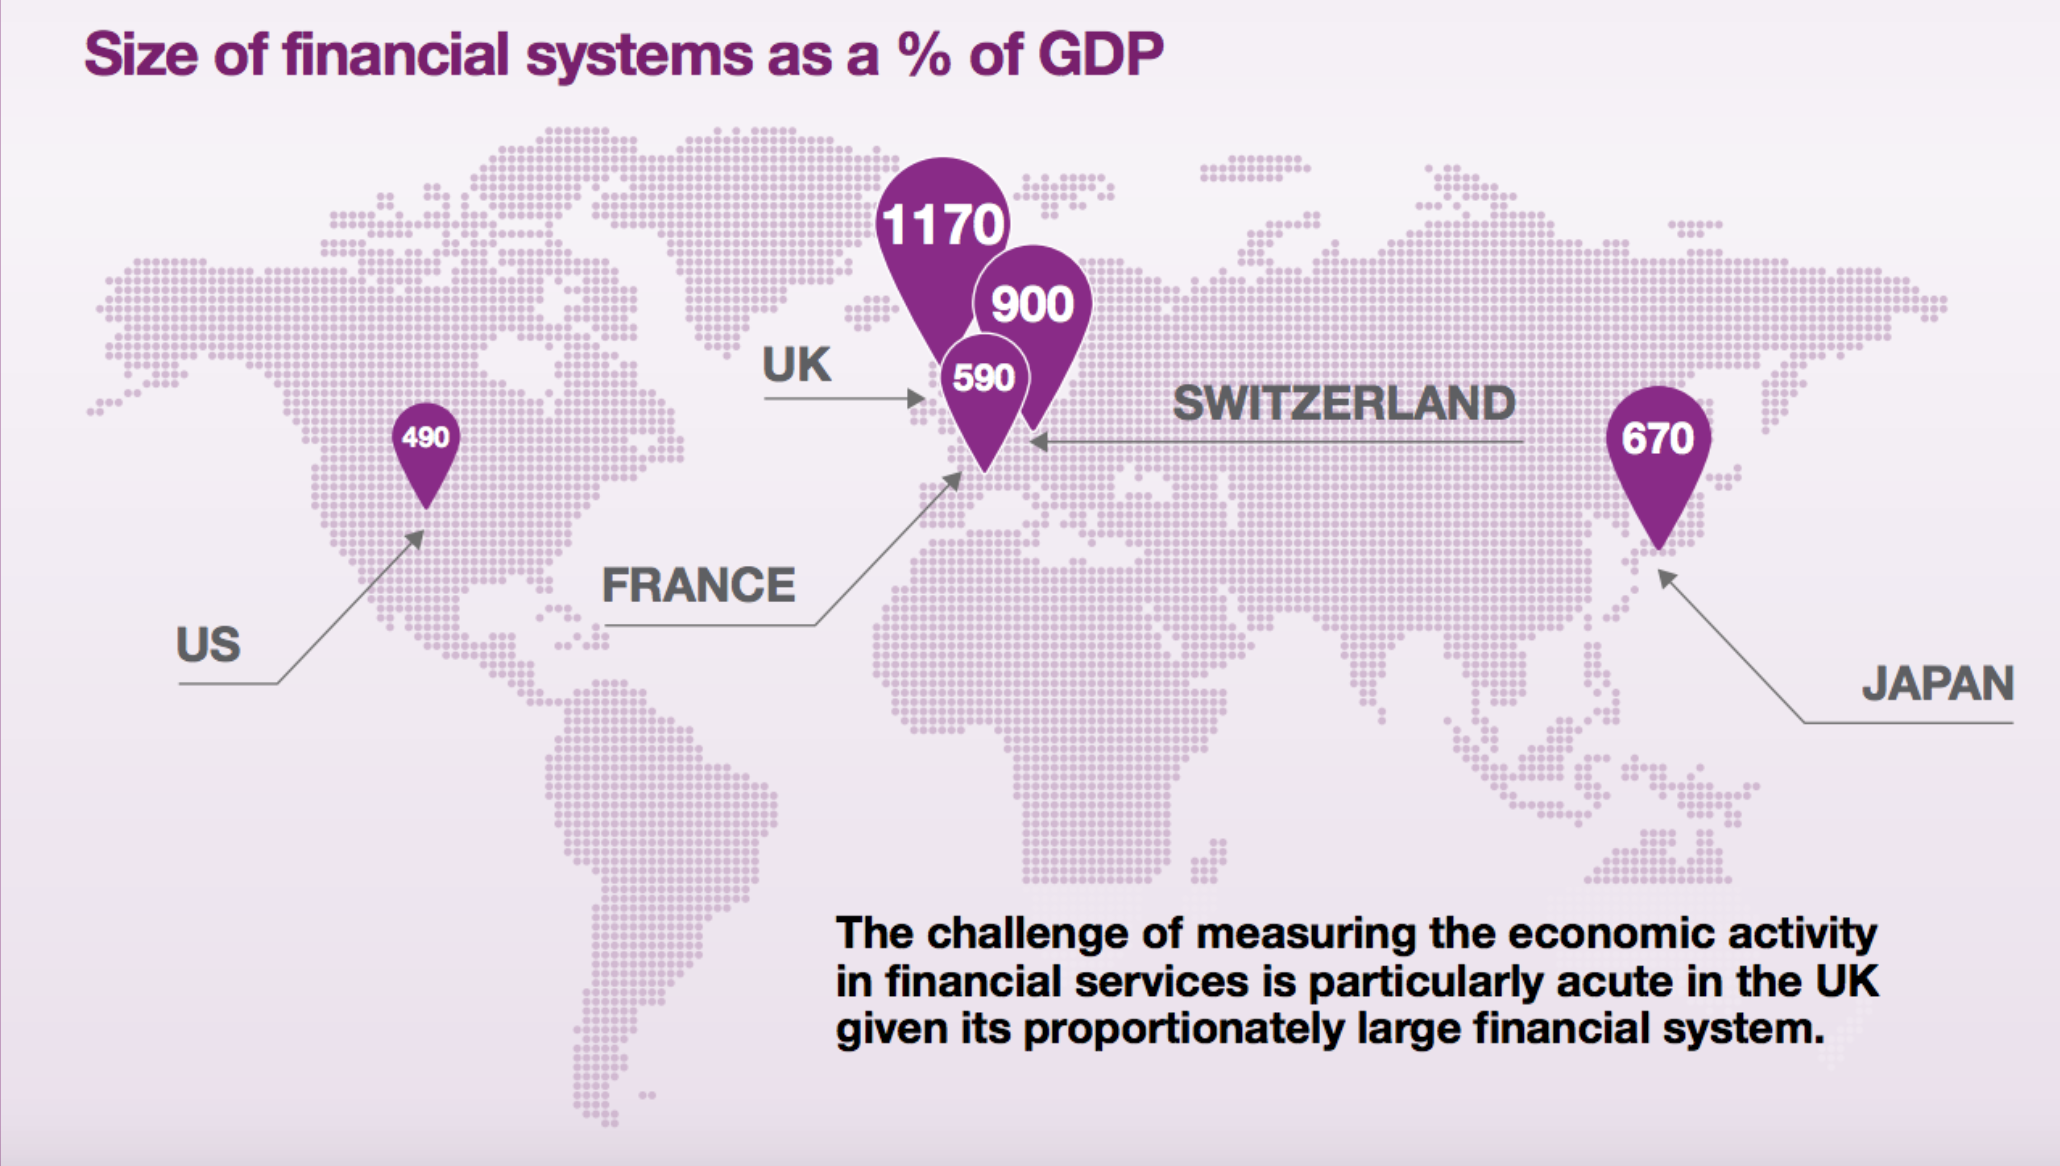 A world map showing the size of financial systems as a share of GDP. The UK's is 1170, Switzerland is 900, France is 590, US is 490, and Japan is 670.